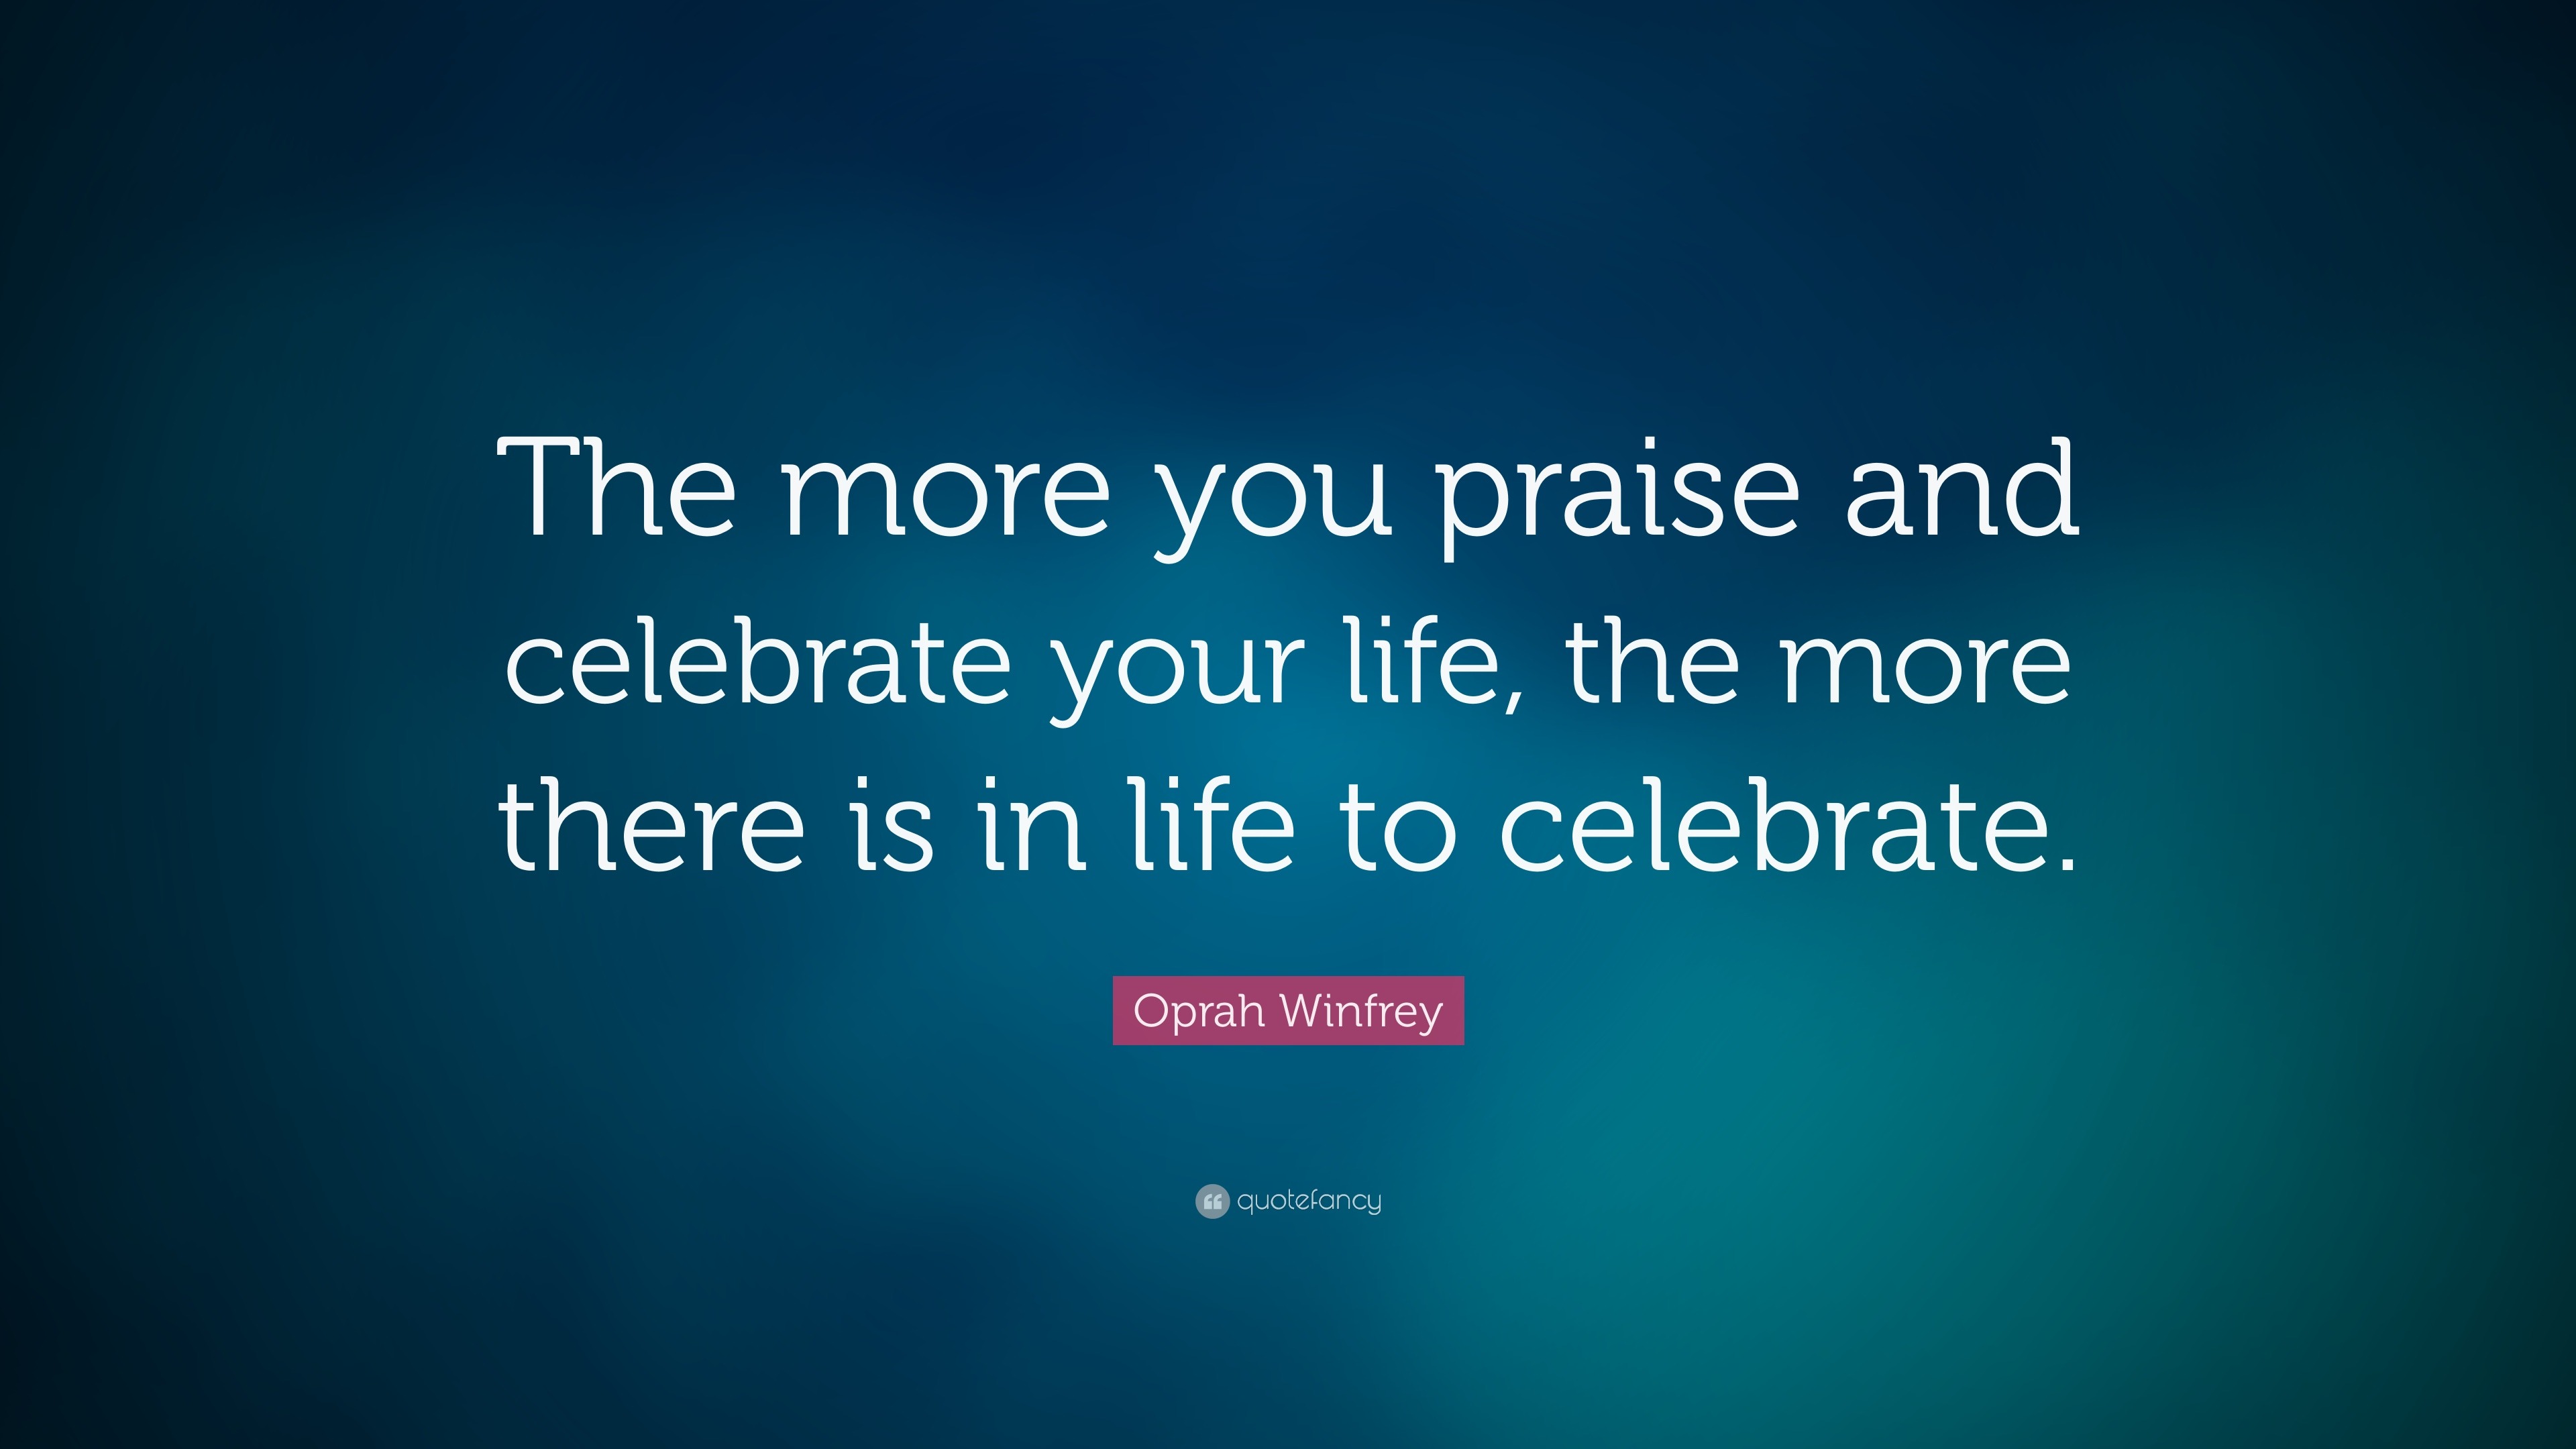 how do you celebrate your life